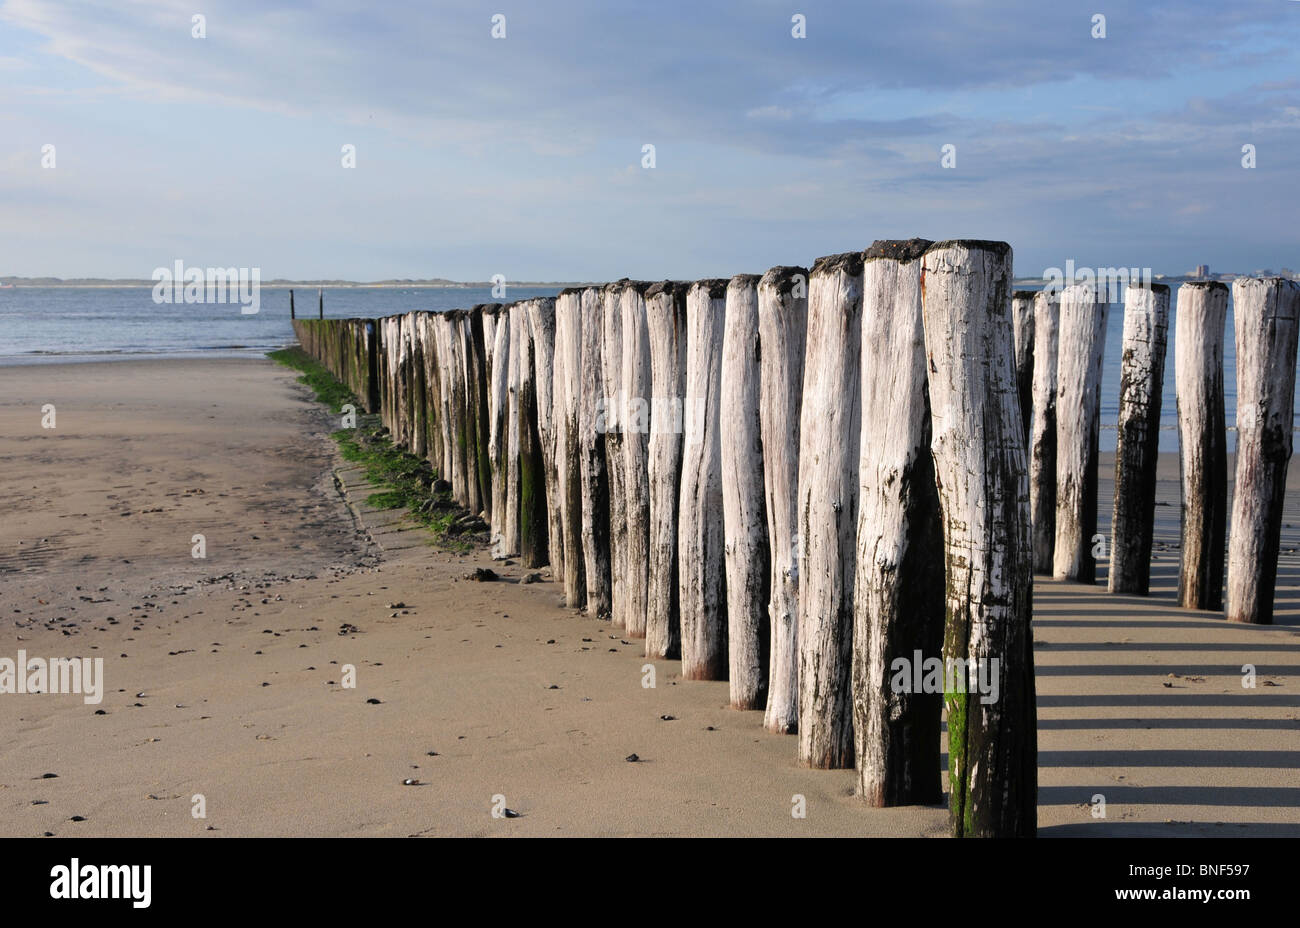 Wooden posts employed as a sea defence to protect the beach at Breskens, Zeeland, Holland Stock Photo